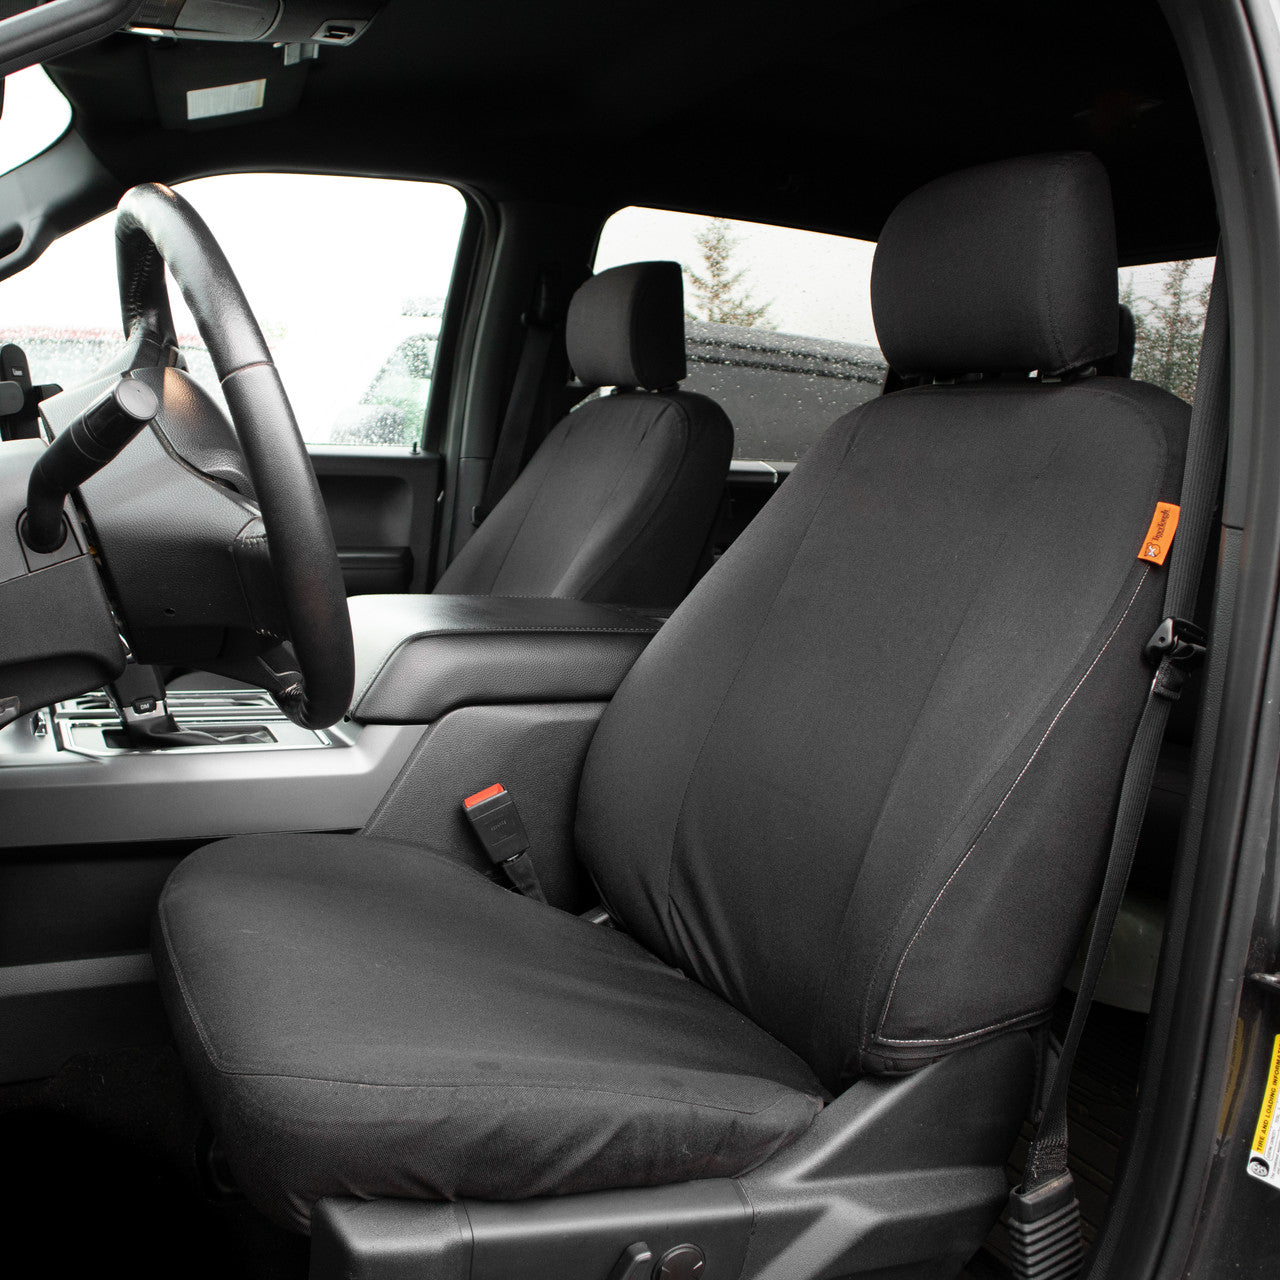 Tactical Antimicrobial Seat Covers for Ford Trucks and Expedition (T0511023)